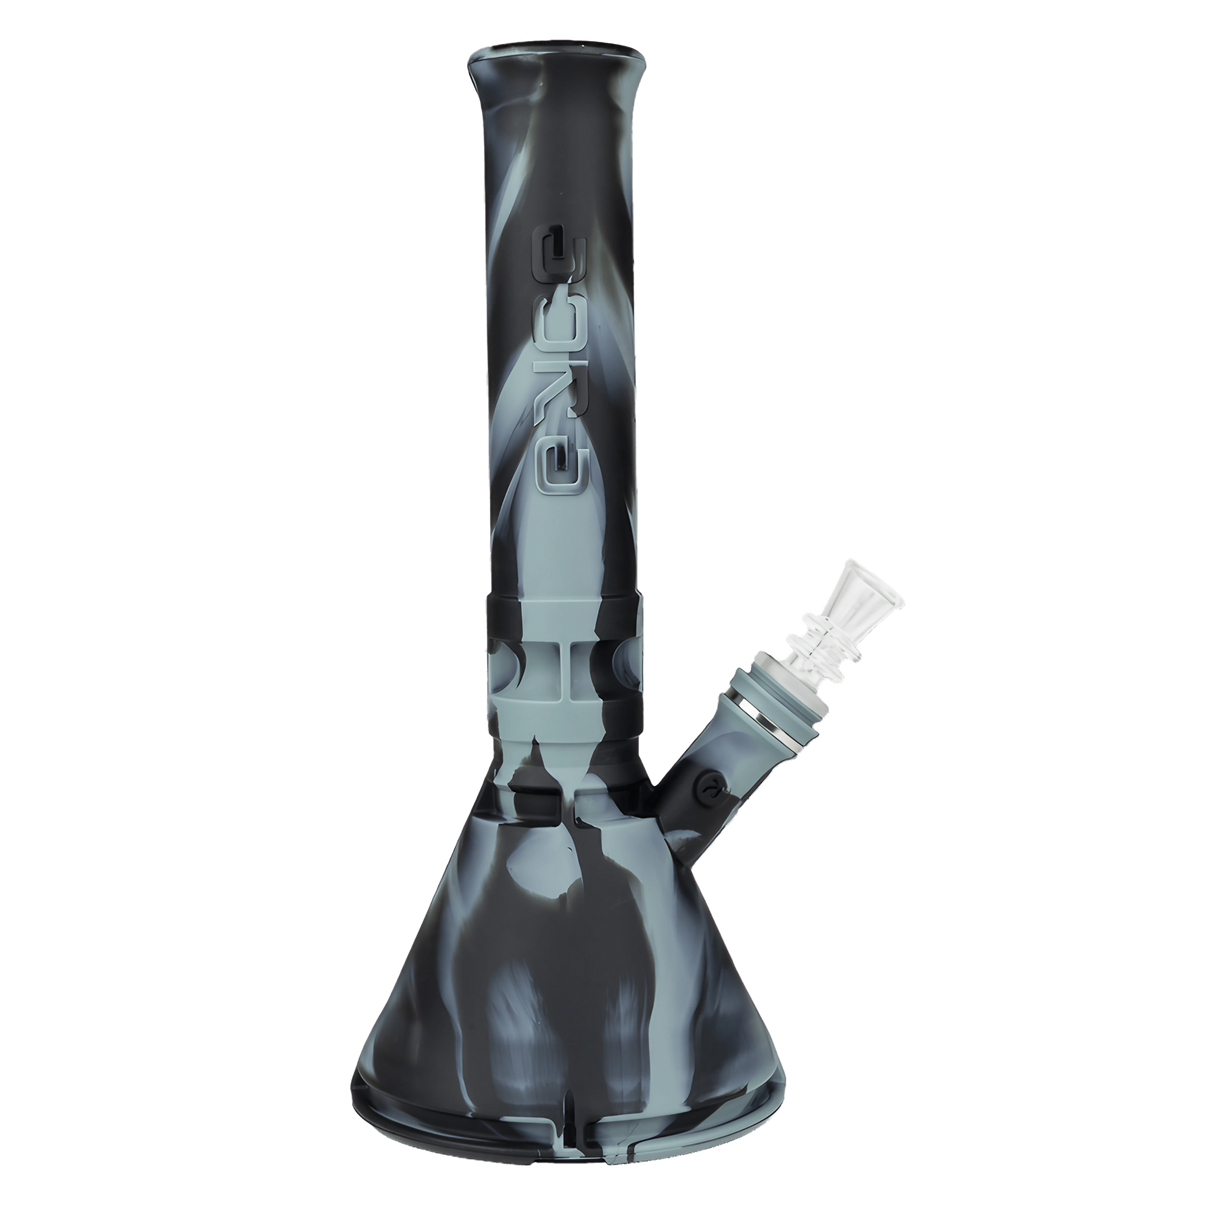 Eyce Beaker Silicone Bong in Charcoal Color - Front View with Removable Bowl